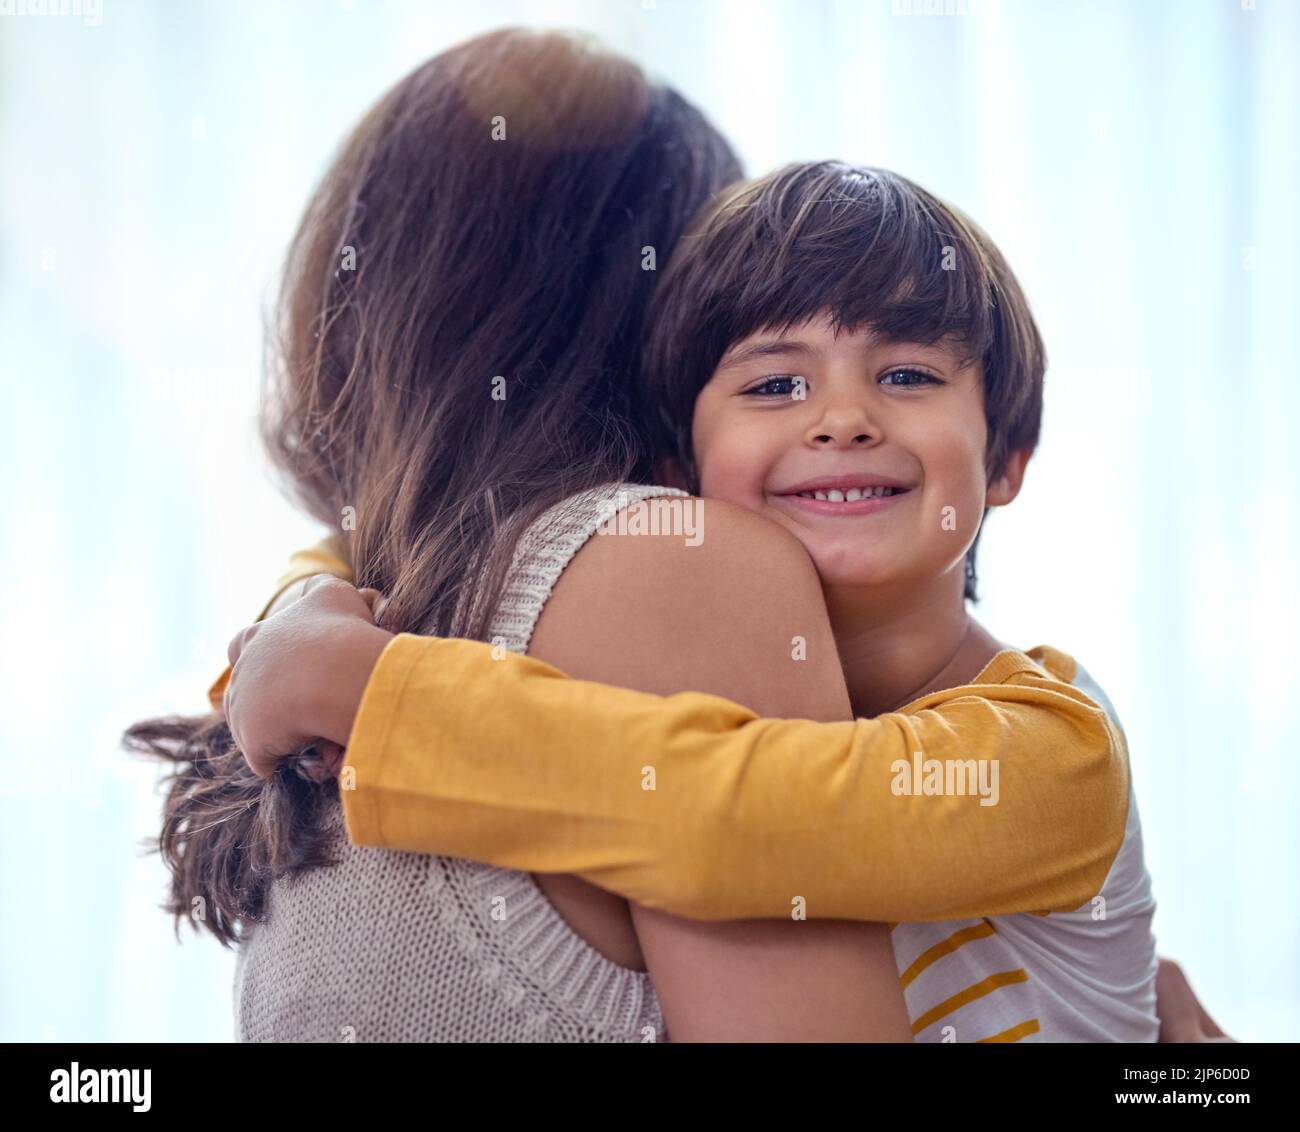 Mom calls me her little man. an adorable little boy affectionately hugging his mother at home. Stock Photo